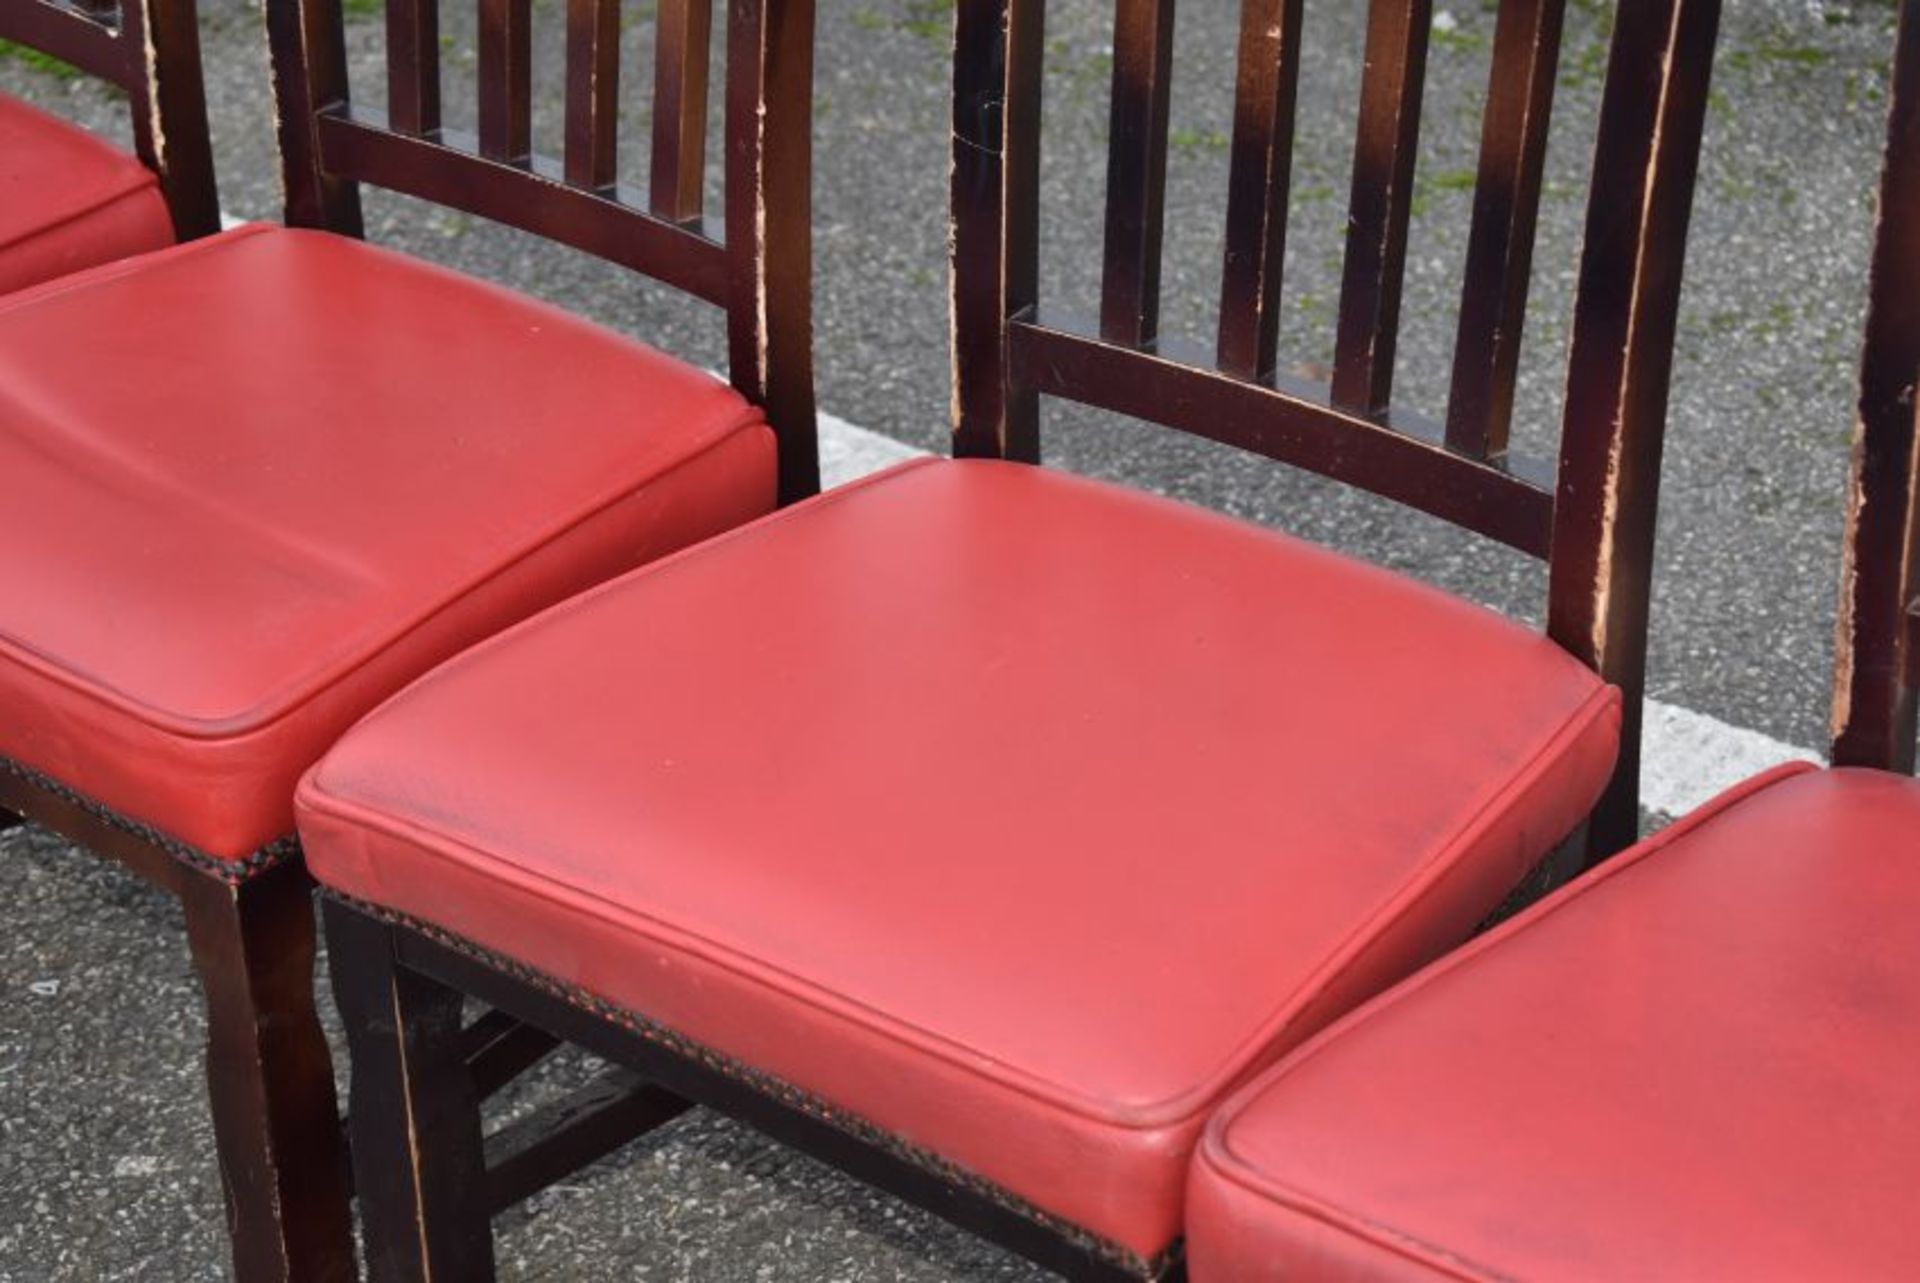 8 x Restaurant Dining Chairs With Dark Stained Wood Finish and Red Leather Seat Pads - Recently - Image 2 of 7